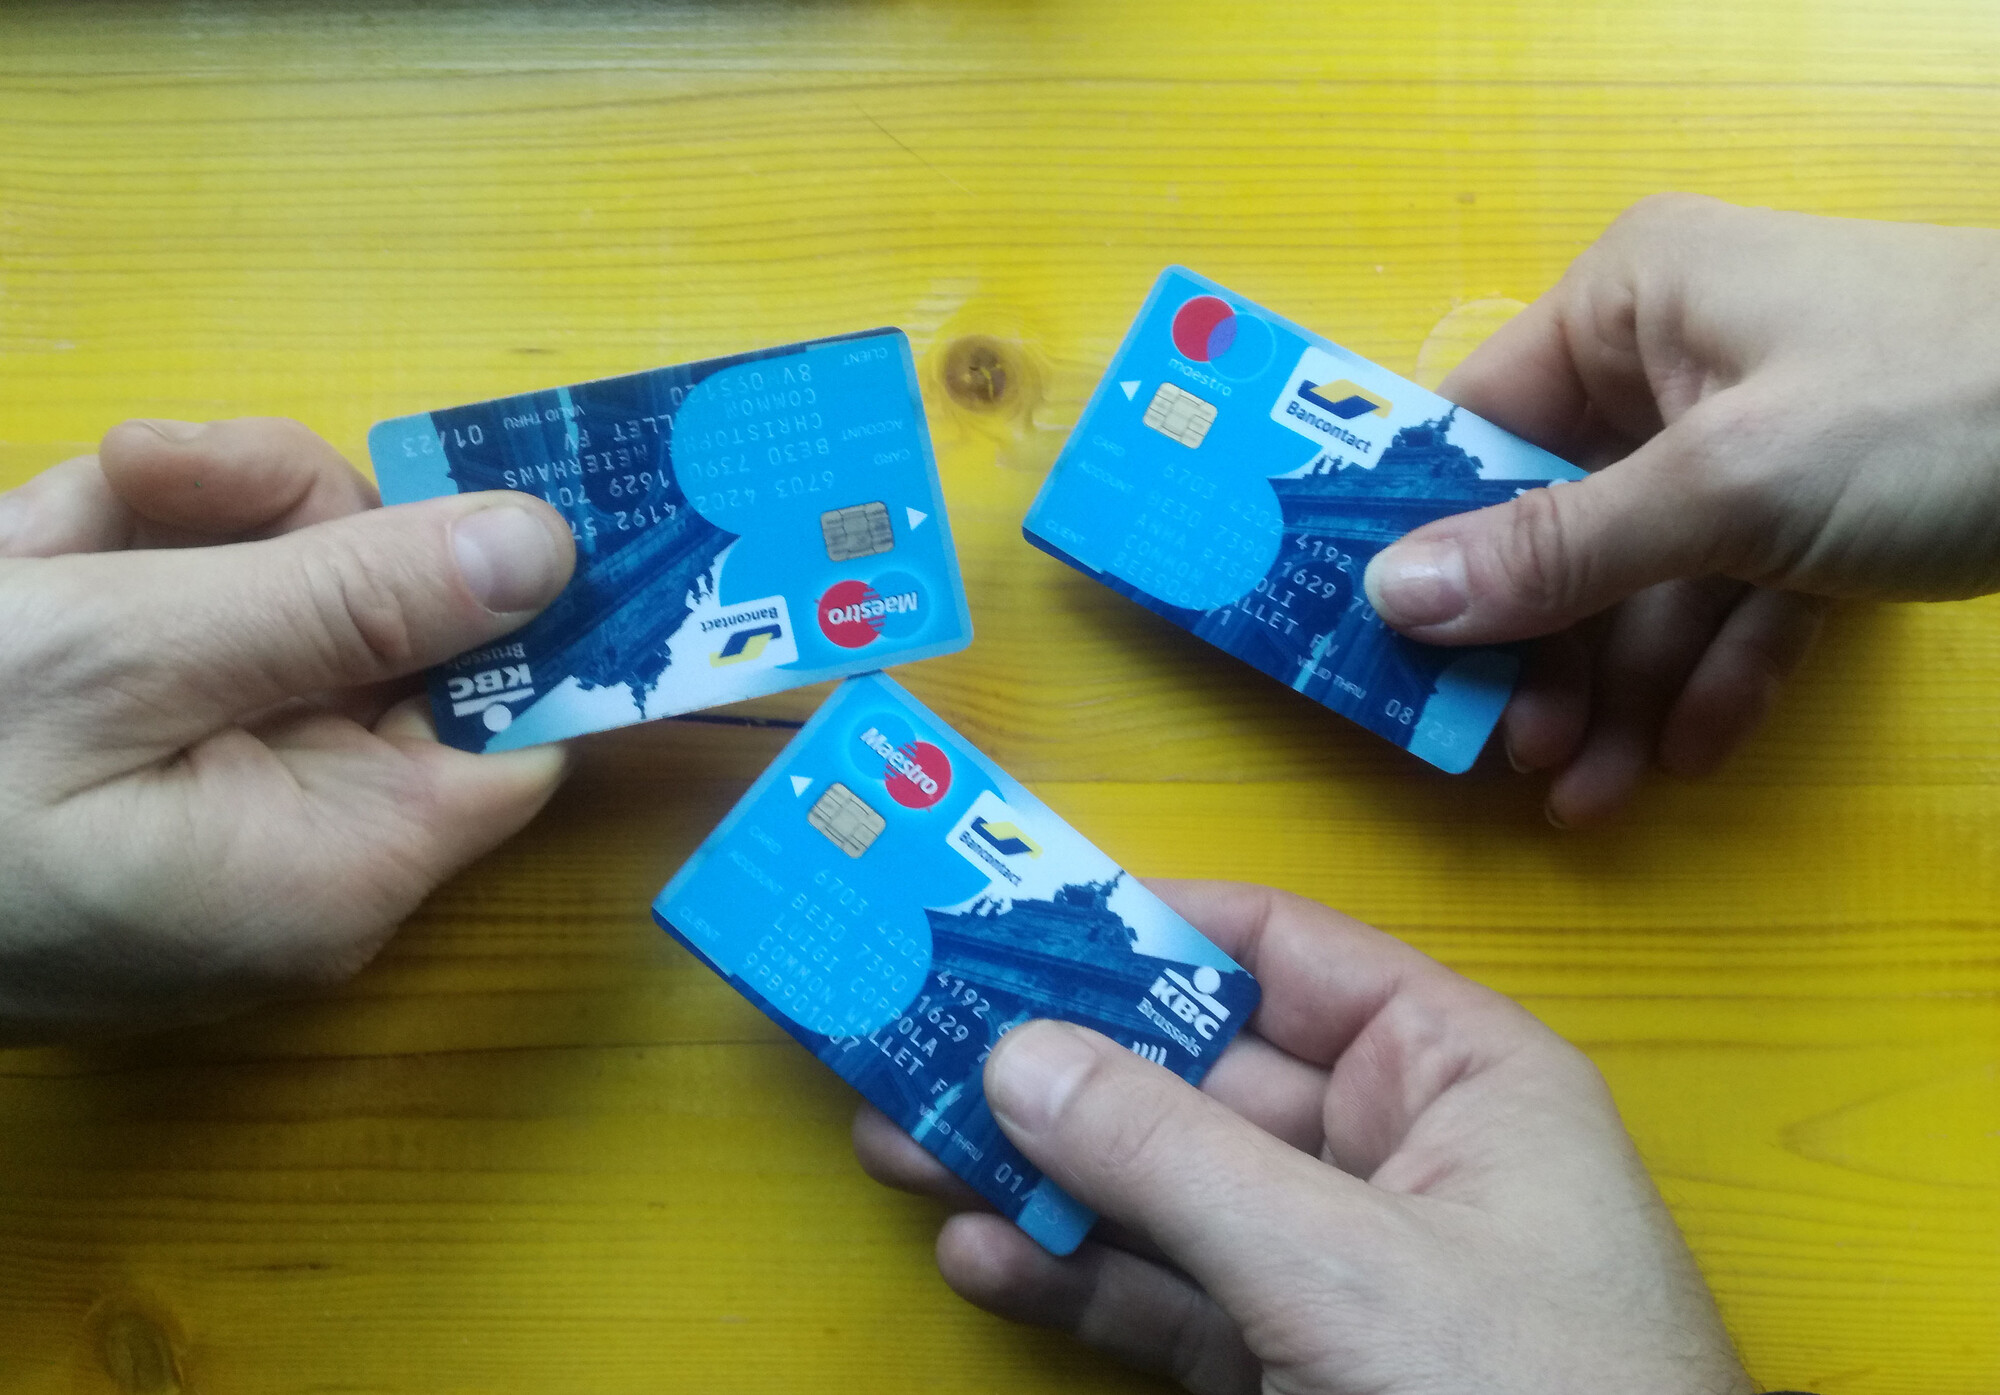 Three people hold their own bank cards that read "Common Wallet" under their names.